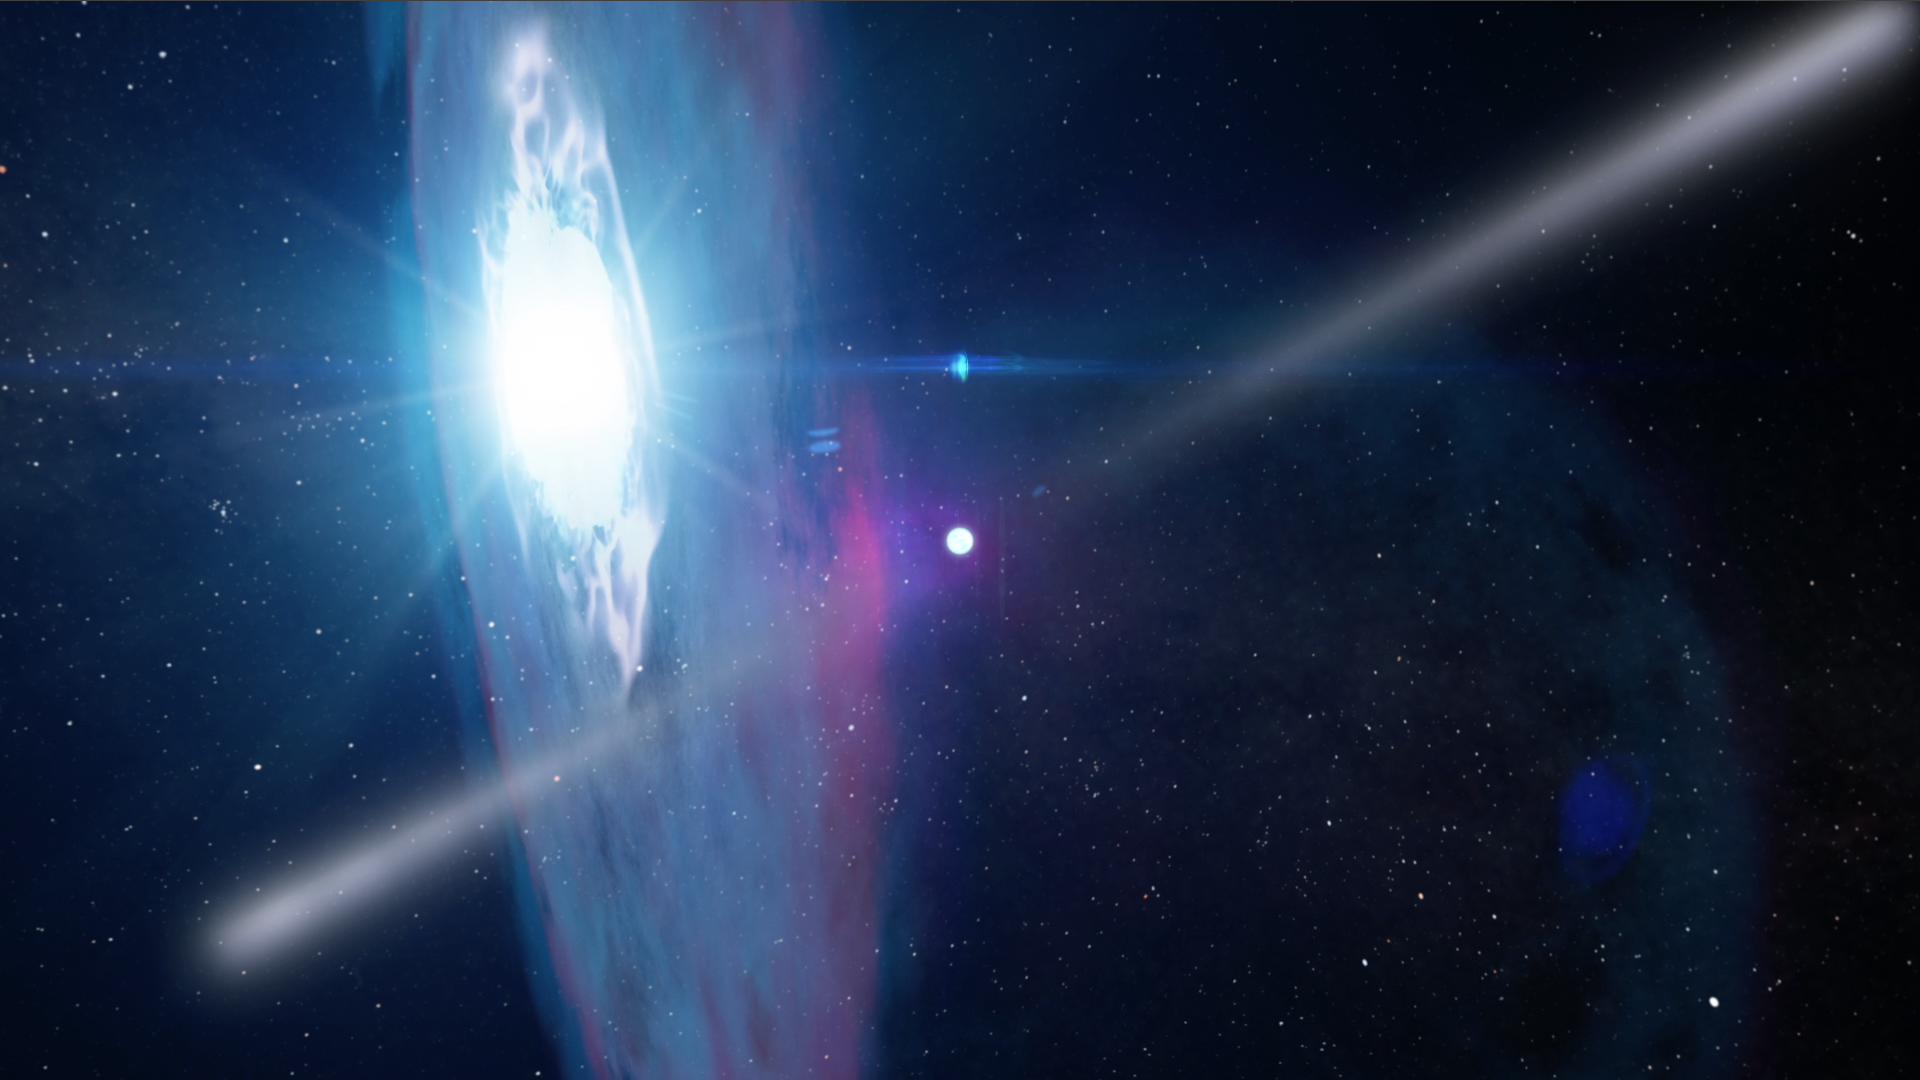 Coming attraction: Astronomers are expecting high-energy explosions when pulsar J2032 swings around its massive companion star in early 2018. The pulsar will plunge through a disk of gas and dust surrounding the star, triggering cosmic fireworks. Scientists are planning a global campaign to watch the event across the spectrum, from radio waves to gamma rays. Credit: NASA's Goddard Space Flight CenterWatch this video on the NASA Goddard YouTube channel.For complete transcript, click here.